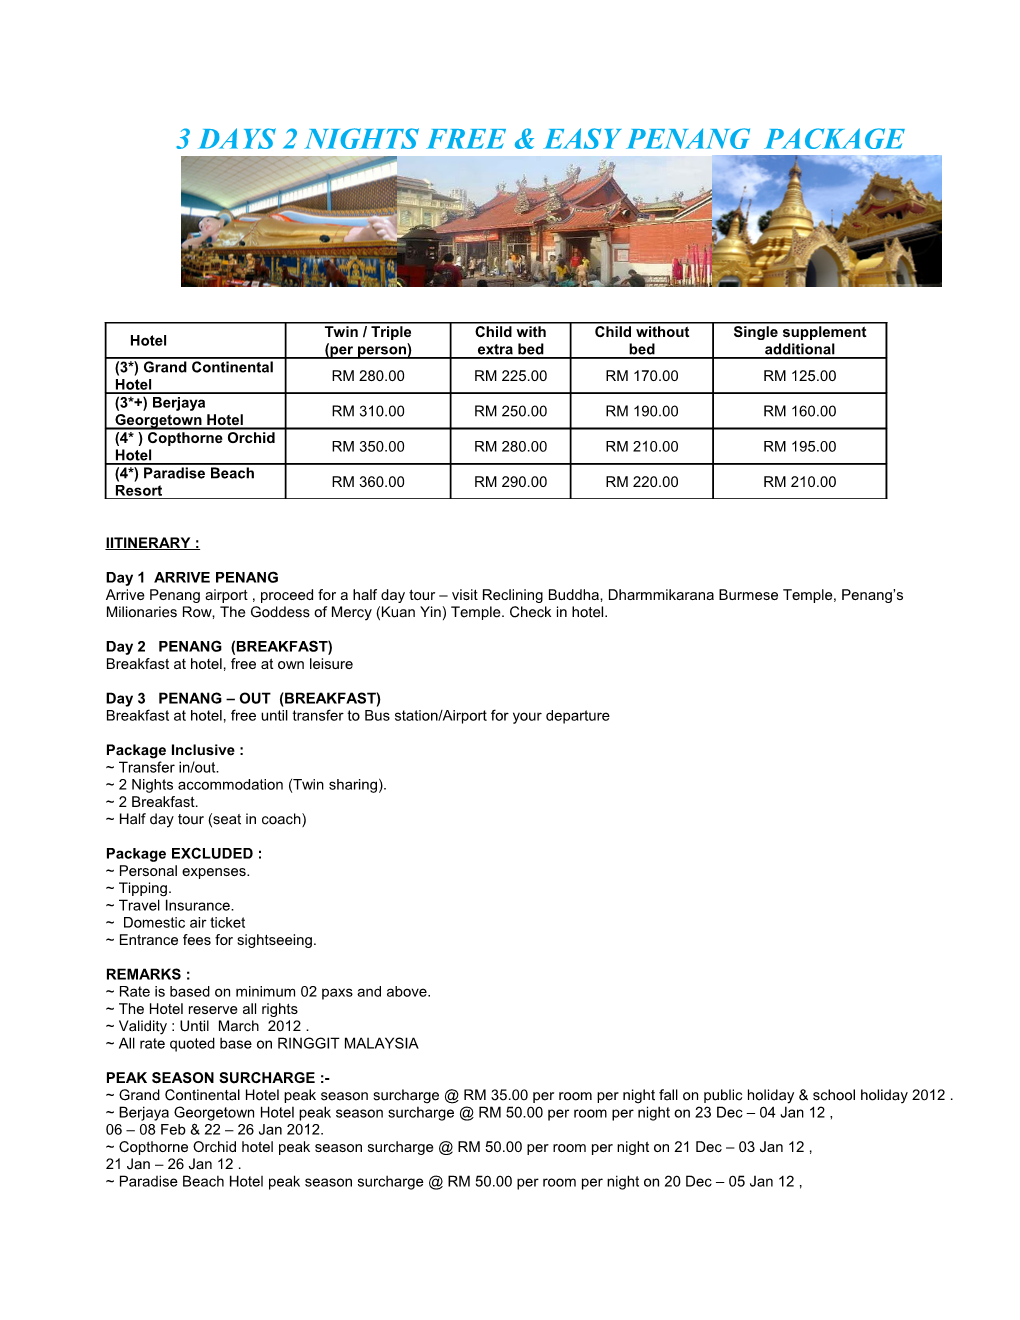 3 DAYS 2 NIGHTS FREE & EASY PENANG PACKAGE Indonesia Market